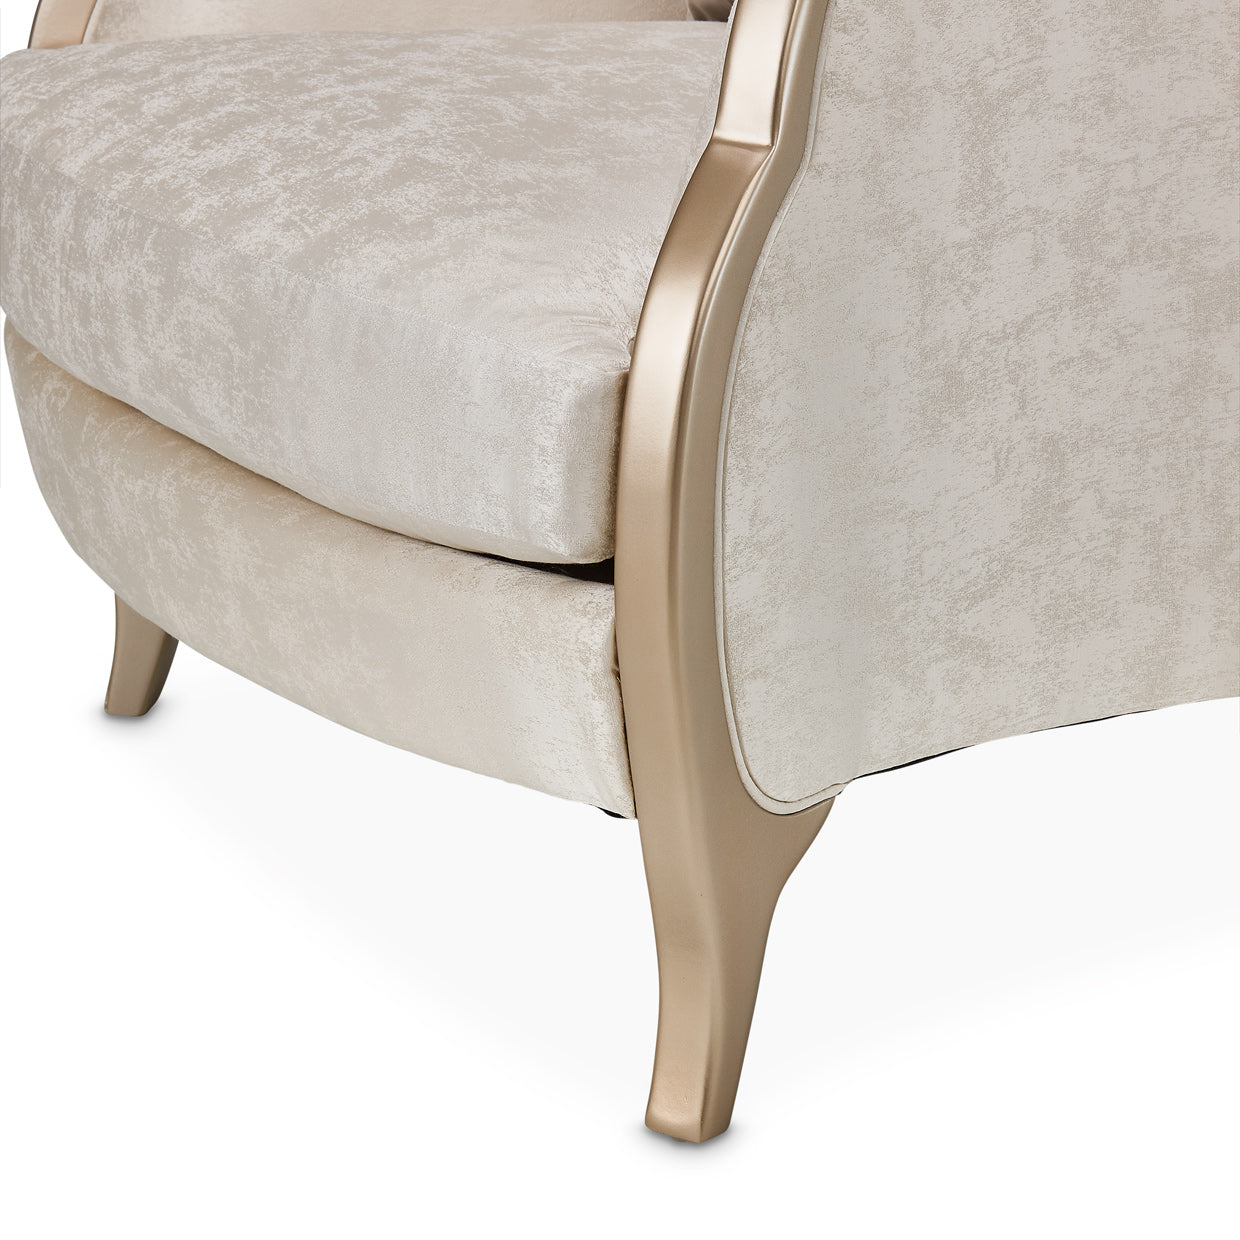 Malibu Crest Chair, Elegant design, Dramatic flared sides, Marbled jacquard upholstery, Cloud White color, Chardonnay finished hardwood, Classy statement, Winged sides, Accent pillow included, Living room furniture, dream art, Michael amini